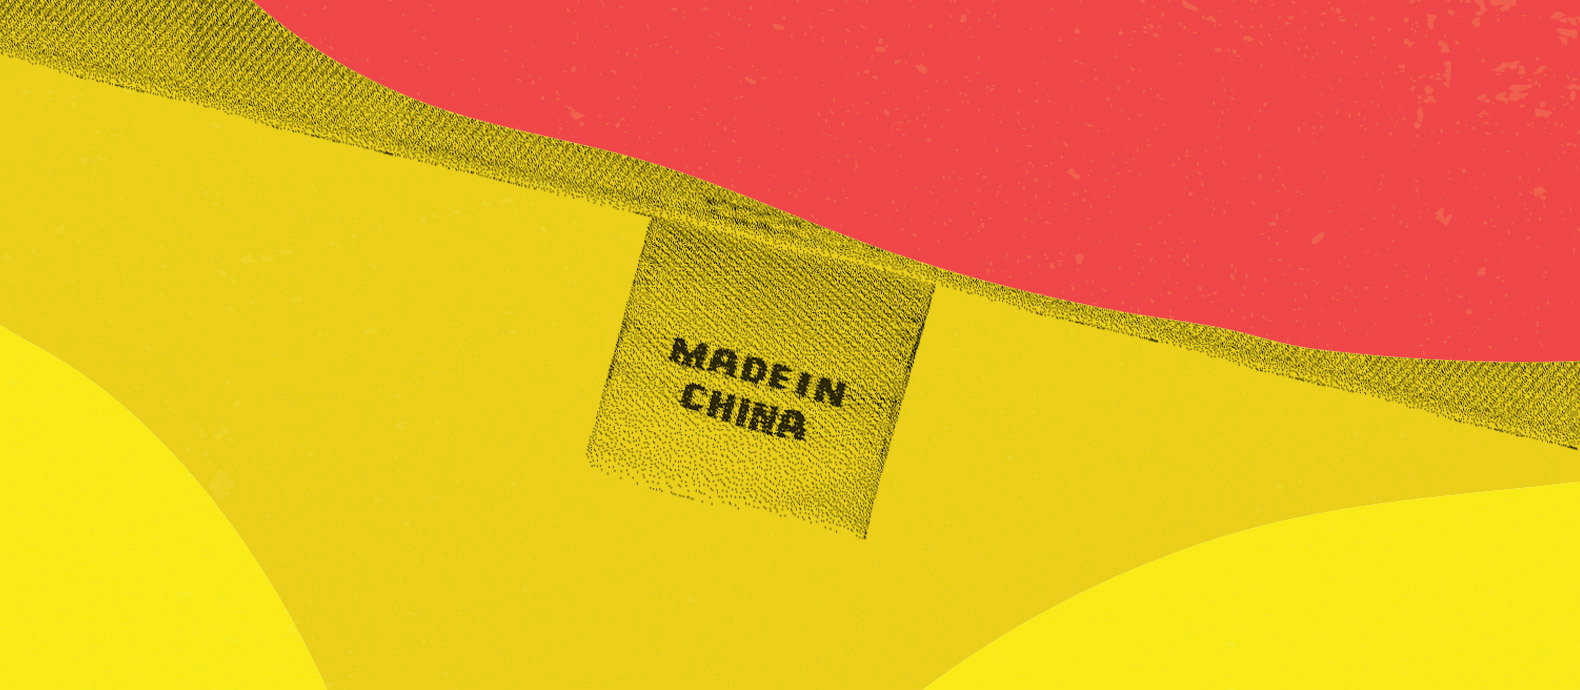 The pros and cons of manufacturing in China